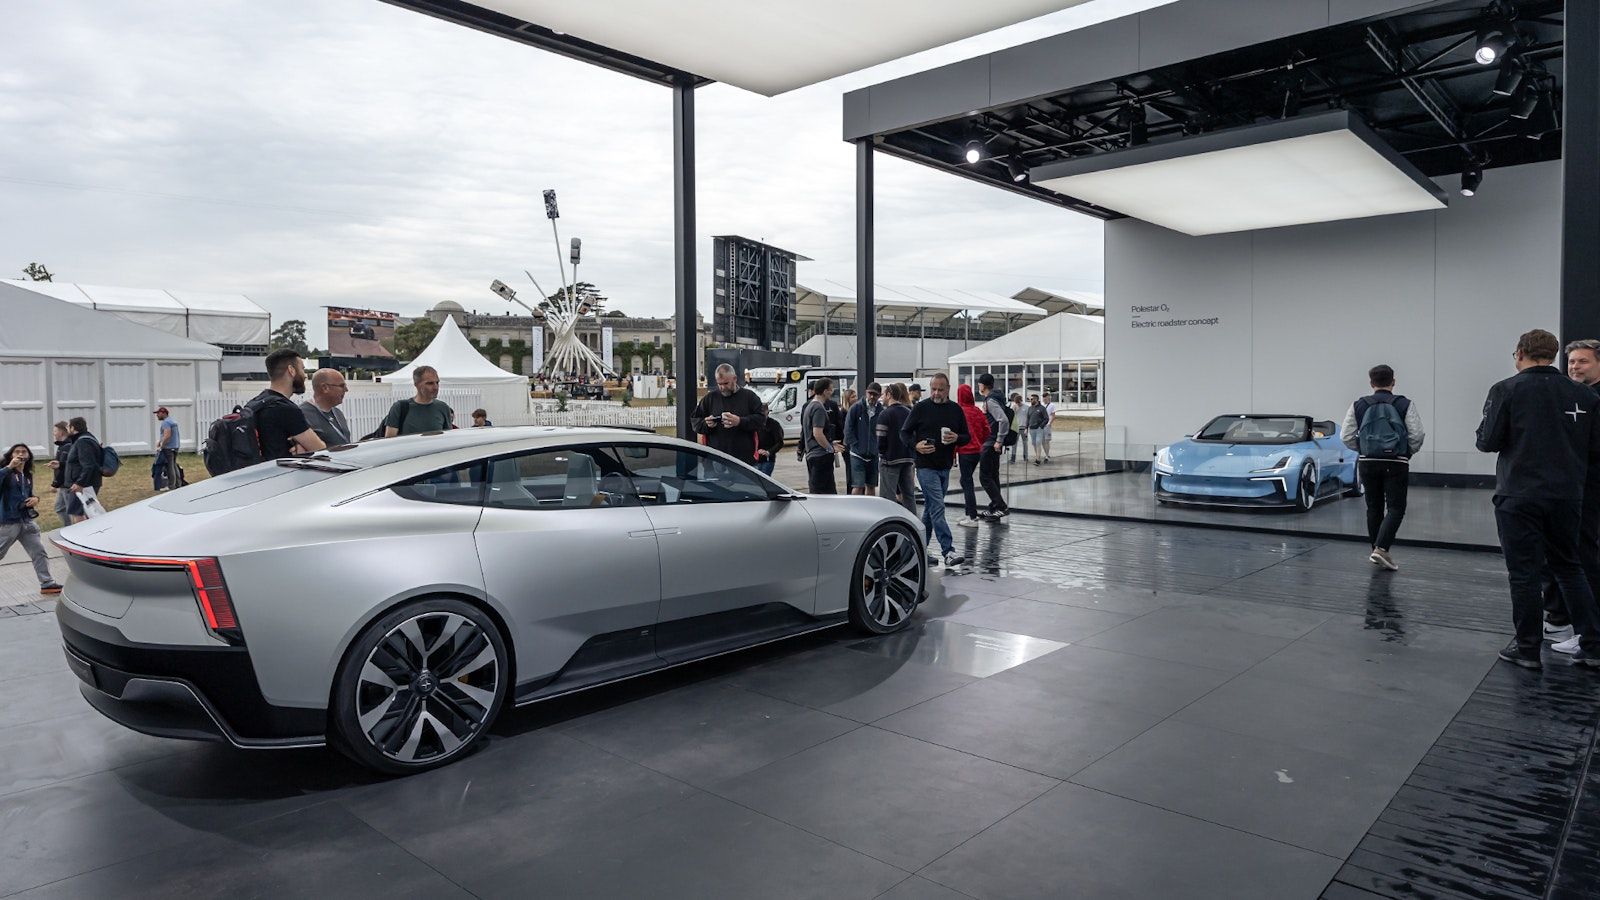 Blue Polestar electric roadster concept facing grey Polestar Precept GT concept at the Polestar stand. 